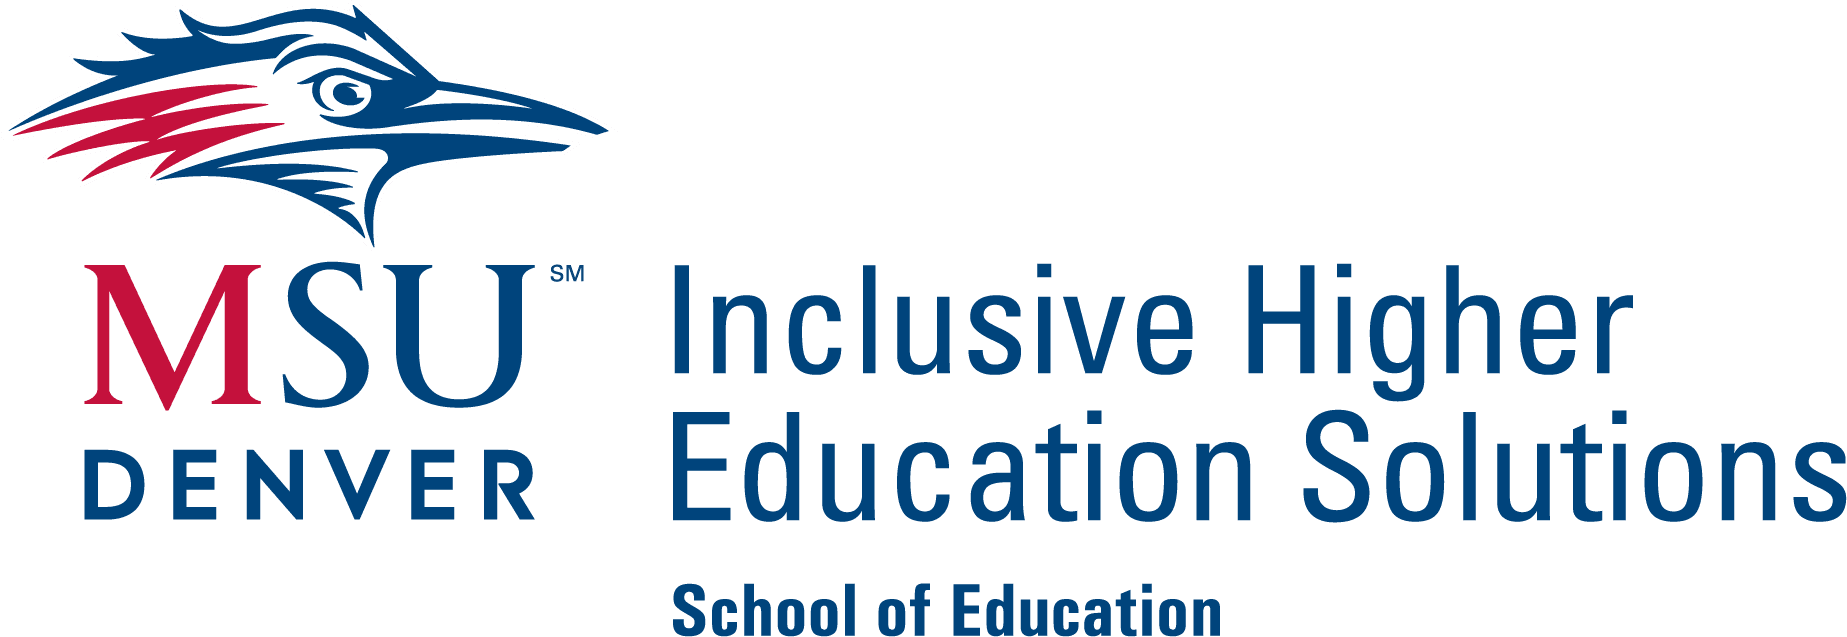 Inclusive Higher Eduacation Solutions at MSU Denver